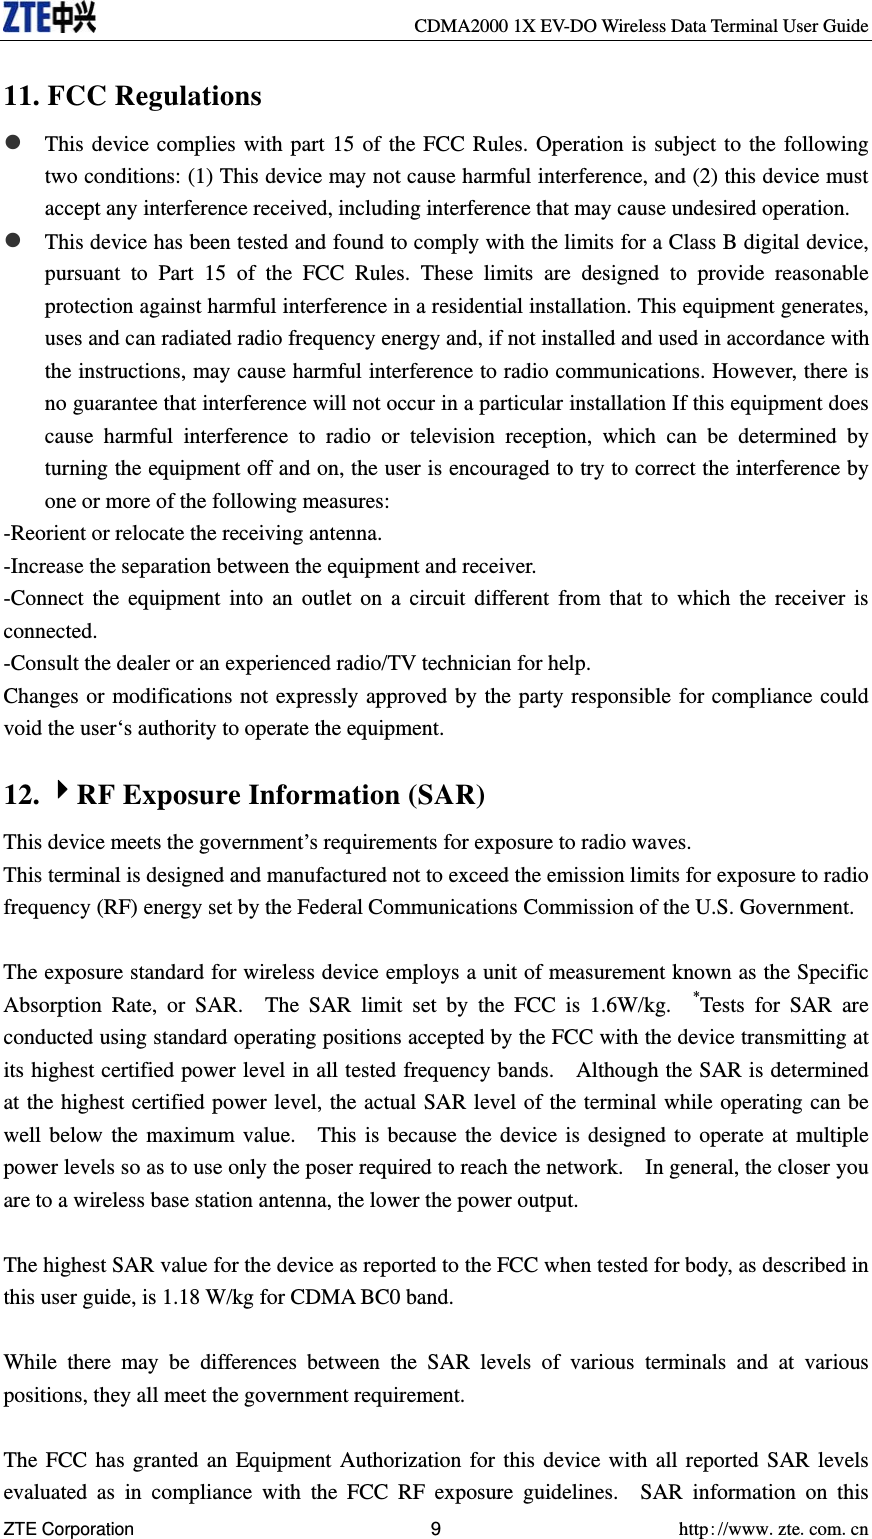     CDMA2000 1X EV-DO Wireless Data Terminal User Guide ZTE Corporation 9 http://www.zte.com.cn  11. FCC Regulations  This device complies with part 15 of the FCC Rules. Operation is subject to the following two conditions: (1) This device may not cause harmful interference, and (2) this device must accept any interference received, including interference that may cause undesired operation.  This device has been tested and found to comply with the limits for a Class B digital device, pursuant to Part 15 of the FCC Rules. These limits are designed to provide reasonable protection against harmful interference in a residential installation. This equipment generates, uses and can radiated radio frequency energy and, if not installed and used in accordance with the instructions, may cause harmful interference to radio communications. However, there is no guarantee that interference will not occur in a particular installation If this equipment does cause harmful interference to radio or television reception, which can be determined by turning the equipment off and on, the user is encouraged to try to correct the interference by one or more of the following measures: -Reorient or relocate the receiving antenna. -Increase the separation between the equipment and receiver. -Connect the equipment into an outlet on a circuit different from that to which the receiver is connected. -Consult the dealer or an experienced radio/TV technician for help. Changes or modifications not expressly approved by the party responsible for compliance could void the user‘s authority to operate the equipment. 12. 4RF Exposure Information (SAR)   This device meets the government’s requirements for exposure to radio waves. This terminal is designed and manufactured not to exceed the emission limits for exposure to radio frequency (RF) energy set by the Federal Communications Commission of the U.S. Government.      The exposure standard for wireless device employs a unit of measurement known as the Specific Absorption Rate, or SAR.  The SAR limit set by the FCC is 1.6W/kg.  *Tests for SAR are conducted using standard operating positions accepted by the FCC with the device transmitting at its highest certified power level in all tested frequency bands.   Although the SAR is determined at the highest certified power level, the actual SAR level of the terminal while operating can be well below the maximum value.  This is because the device is designed to operate at multiple power levels so as to use only the poser required to reach the network.    In general, the closer you are to a wireless base station antenna, the lower the power output.  The highest SAR value for the device as reported to the FCC when tested for body, as described in this user guide, is 1.18 W/kg for CDMA BC0 band.  While there may be differences between the SAR levels of various terminals and at various positions, they all meet the government requirement.  The FCC has granted an Equipment Authorization for this device with all reported SAR levels evaluated as in compliance with the FCC RF exposure guidelines.  SAR information on this 